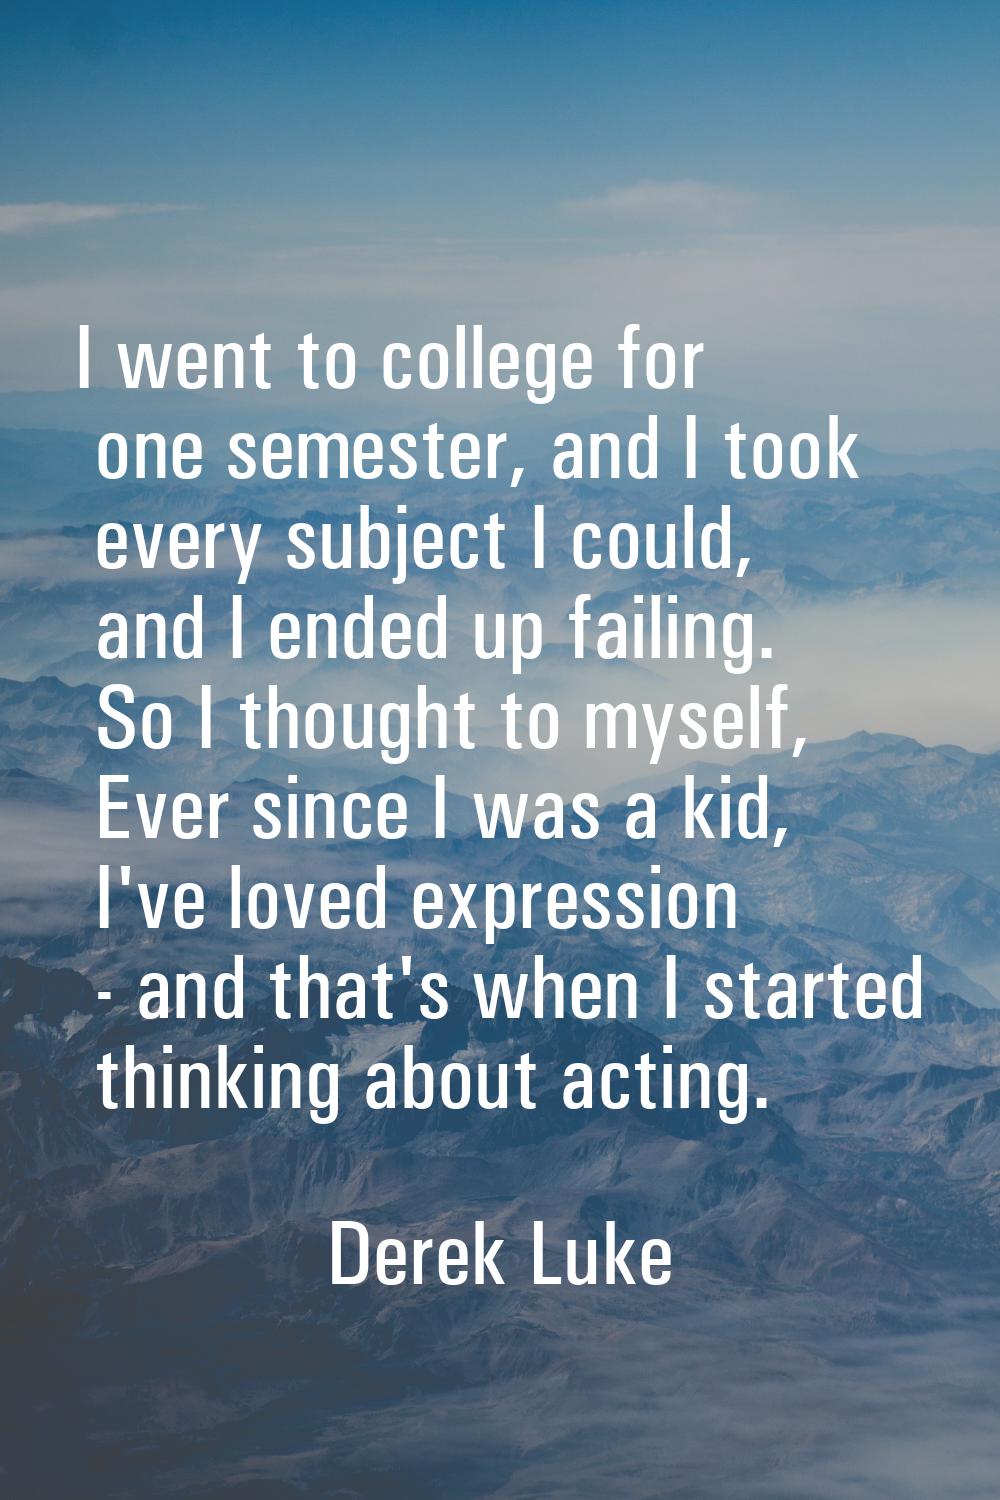 I went to college for one semester, and I took every subject I could, and I ended up failing. So I 